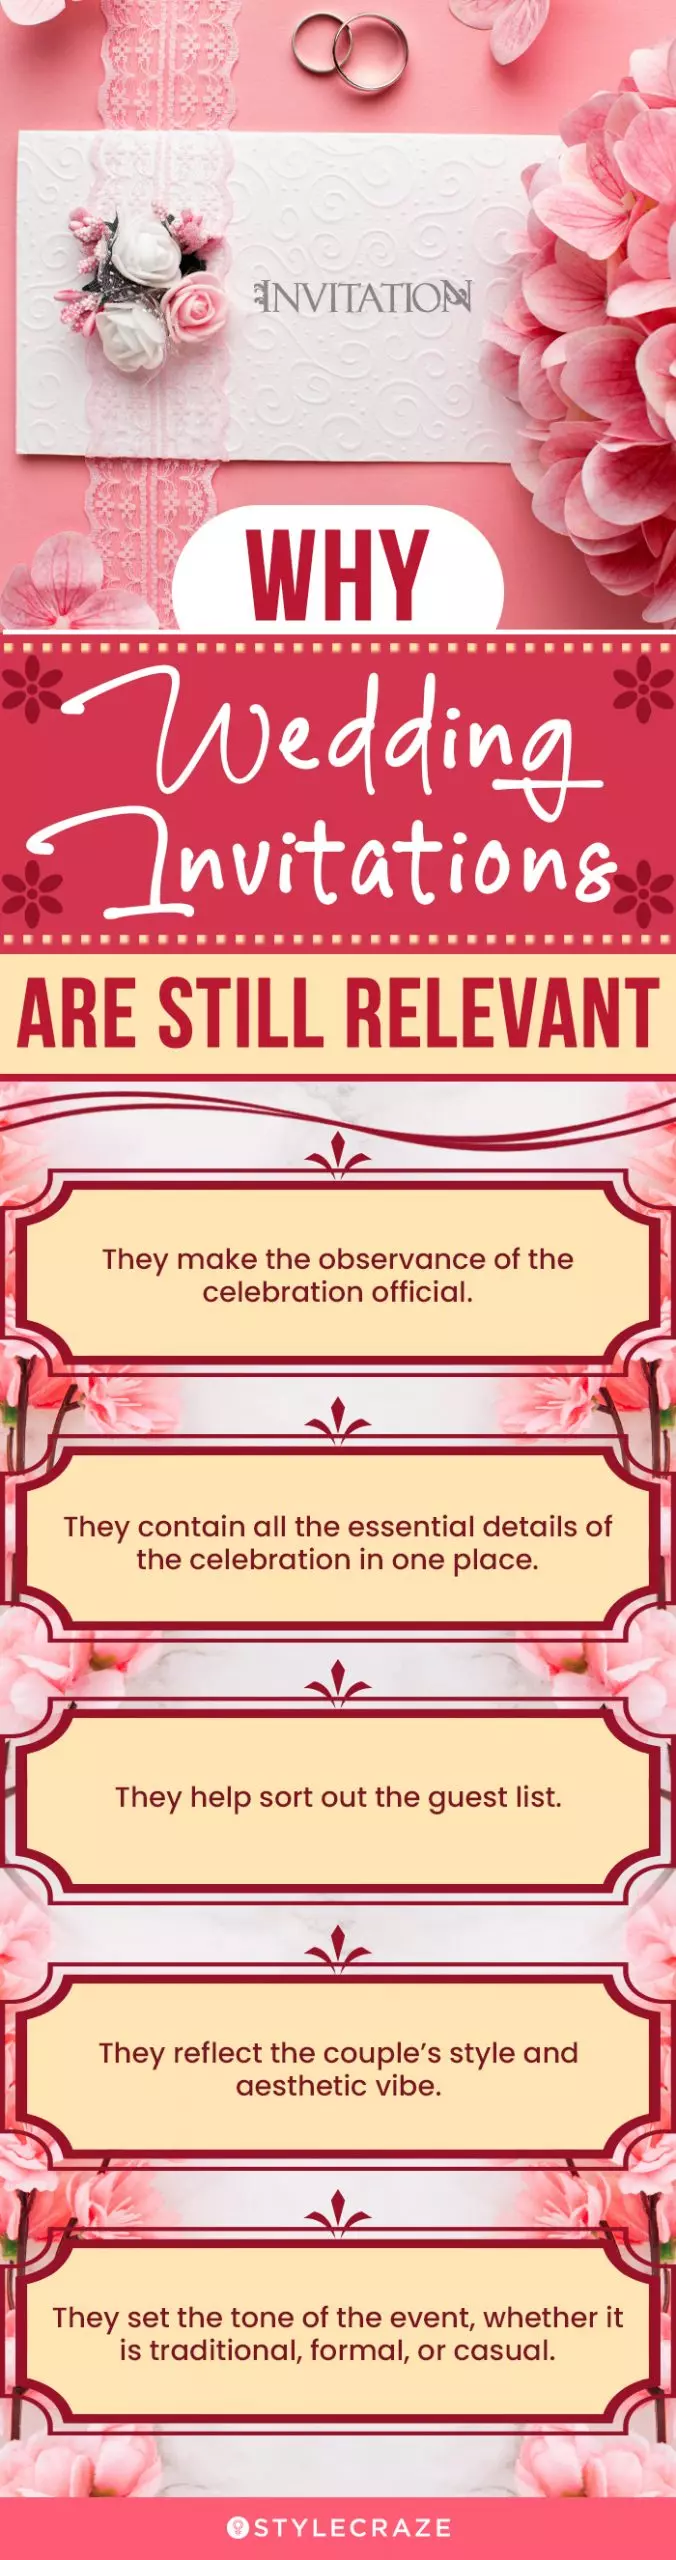 why wedding invitations are still relevant (infographic)